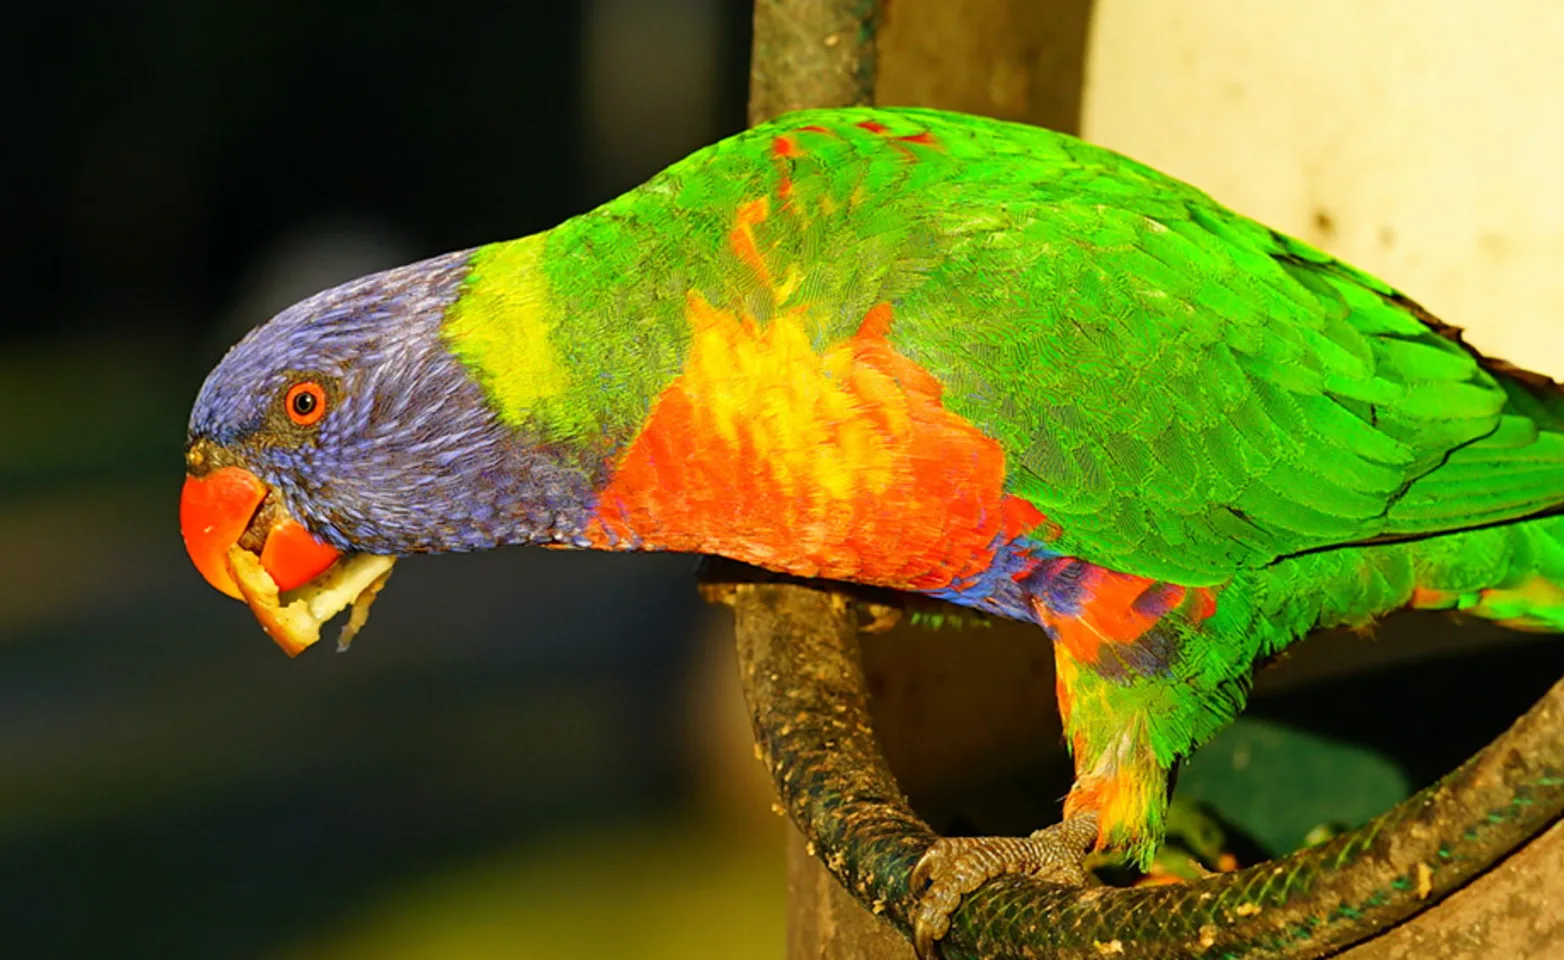 A colorful parrot standing and eating a seed